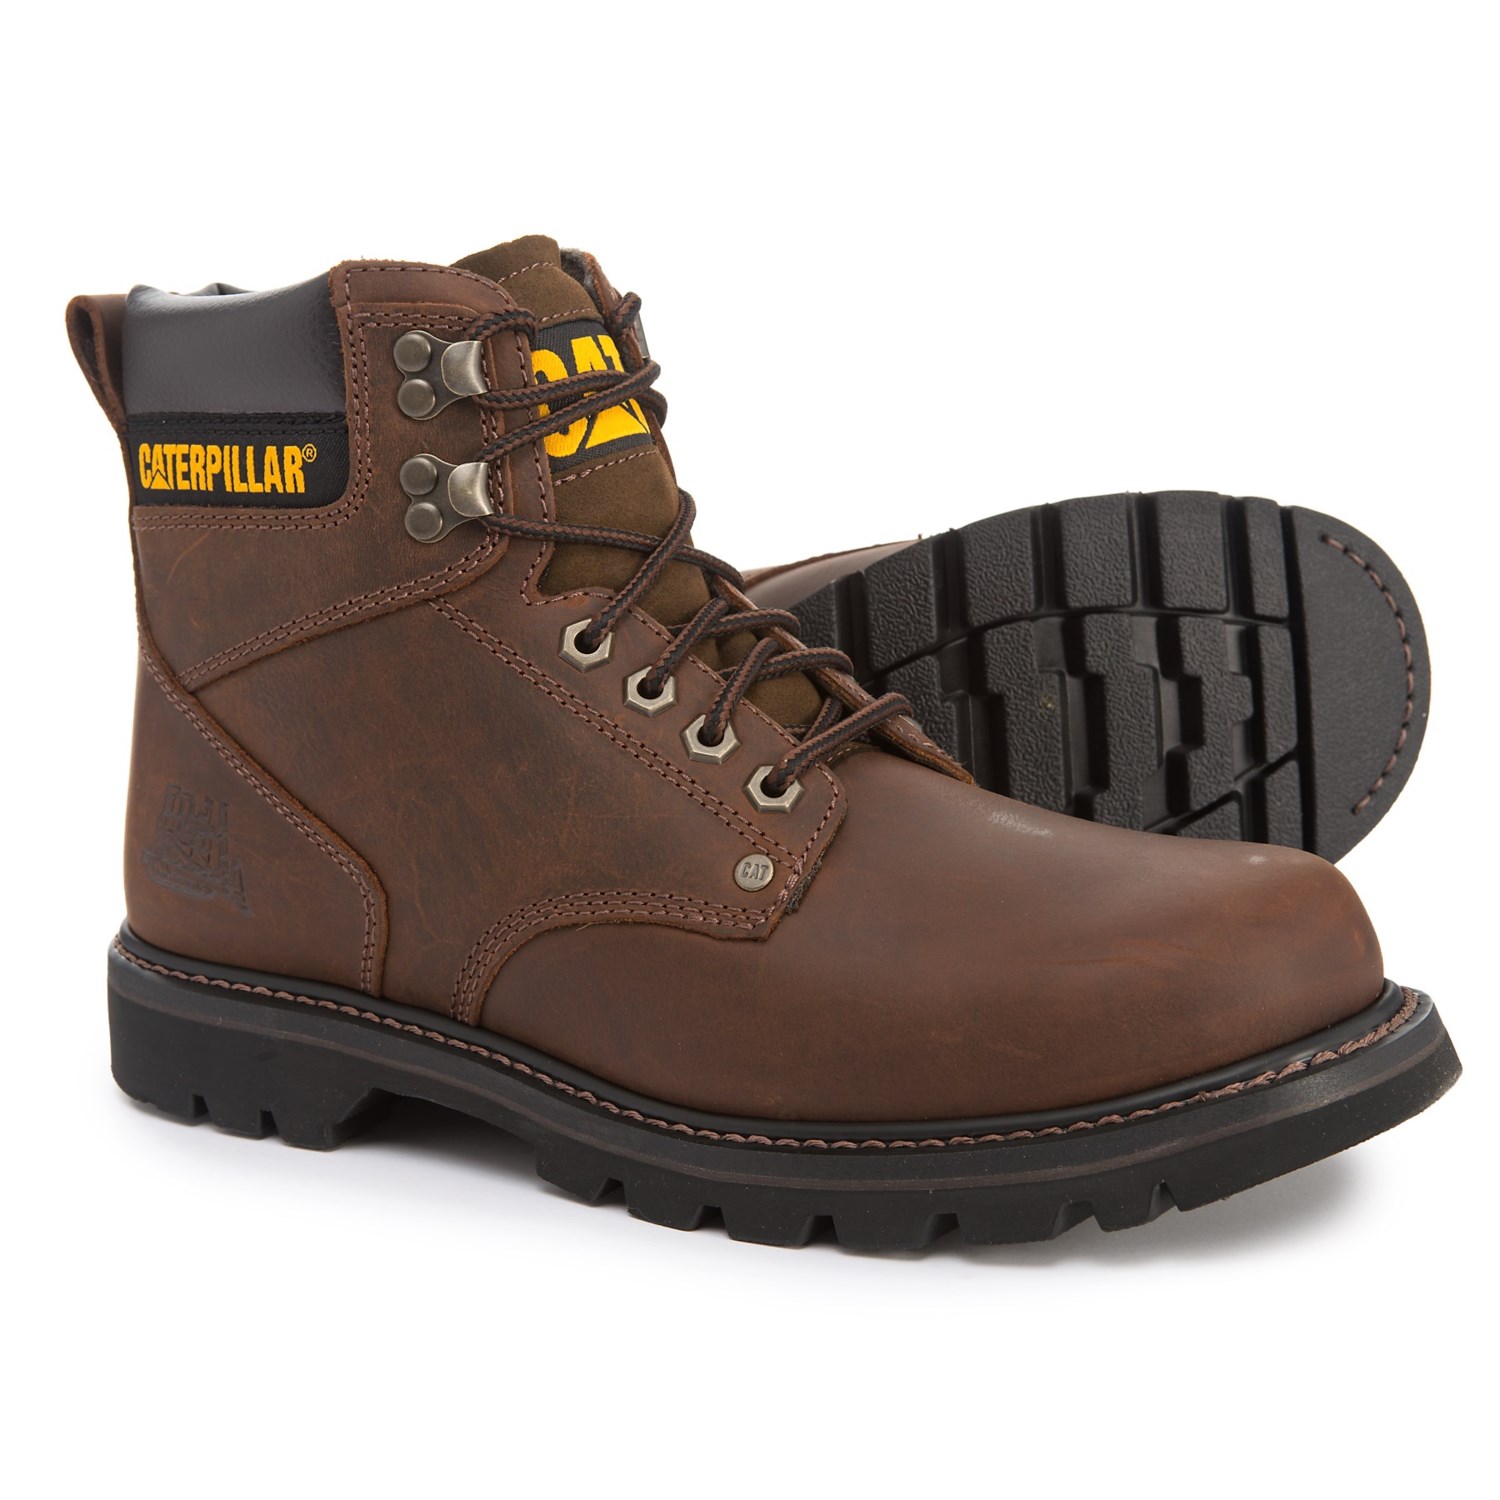 Caterpillar Second Shift Work Boots – Leather (For Men)